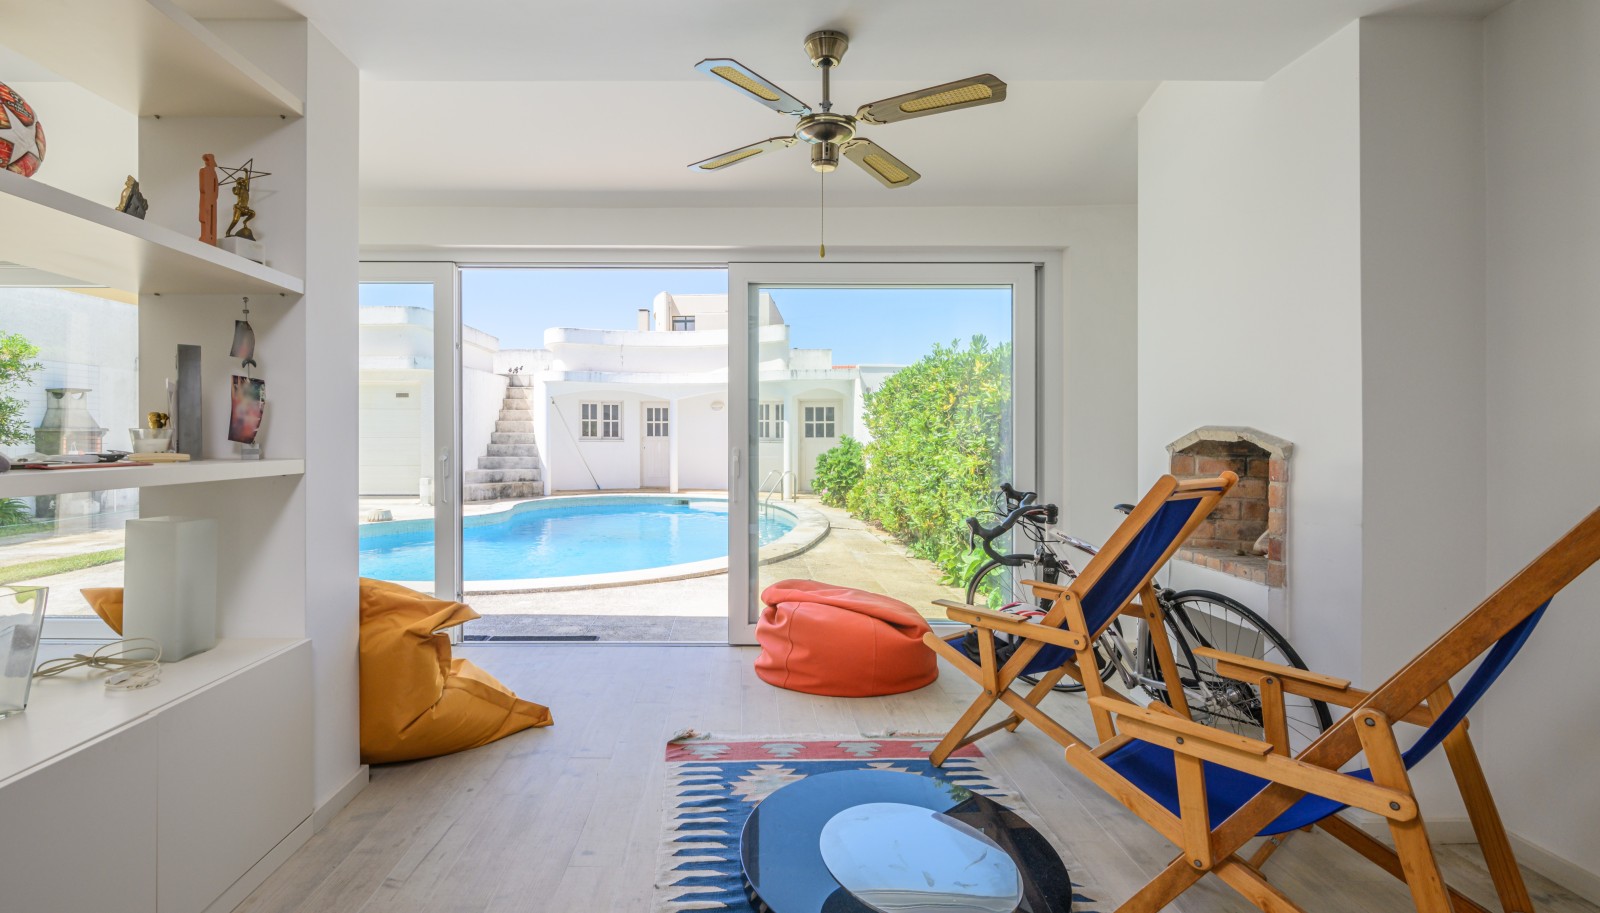 Sale: 3-bedroom villa with pool, on the 2nd line of the sea, in Miramar, V. N. Gaia, Portugal_235232